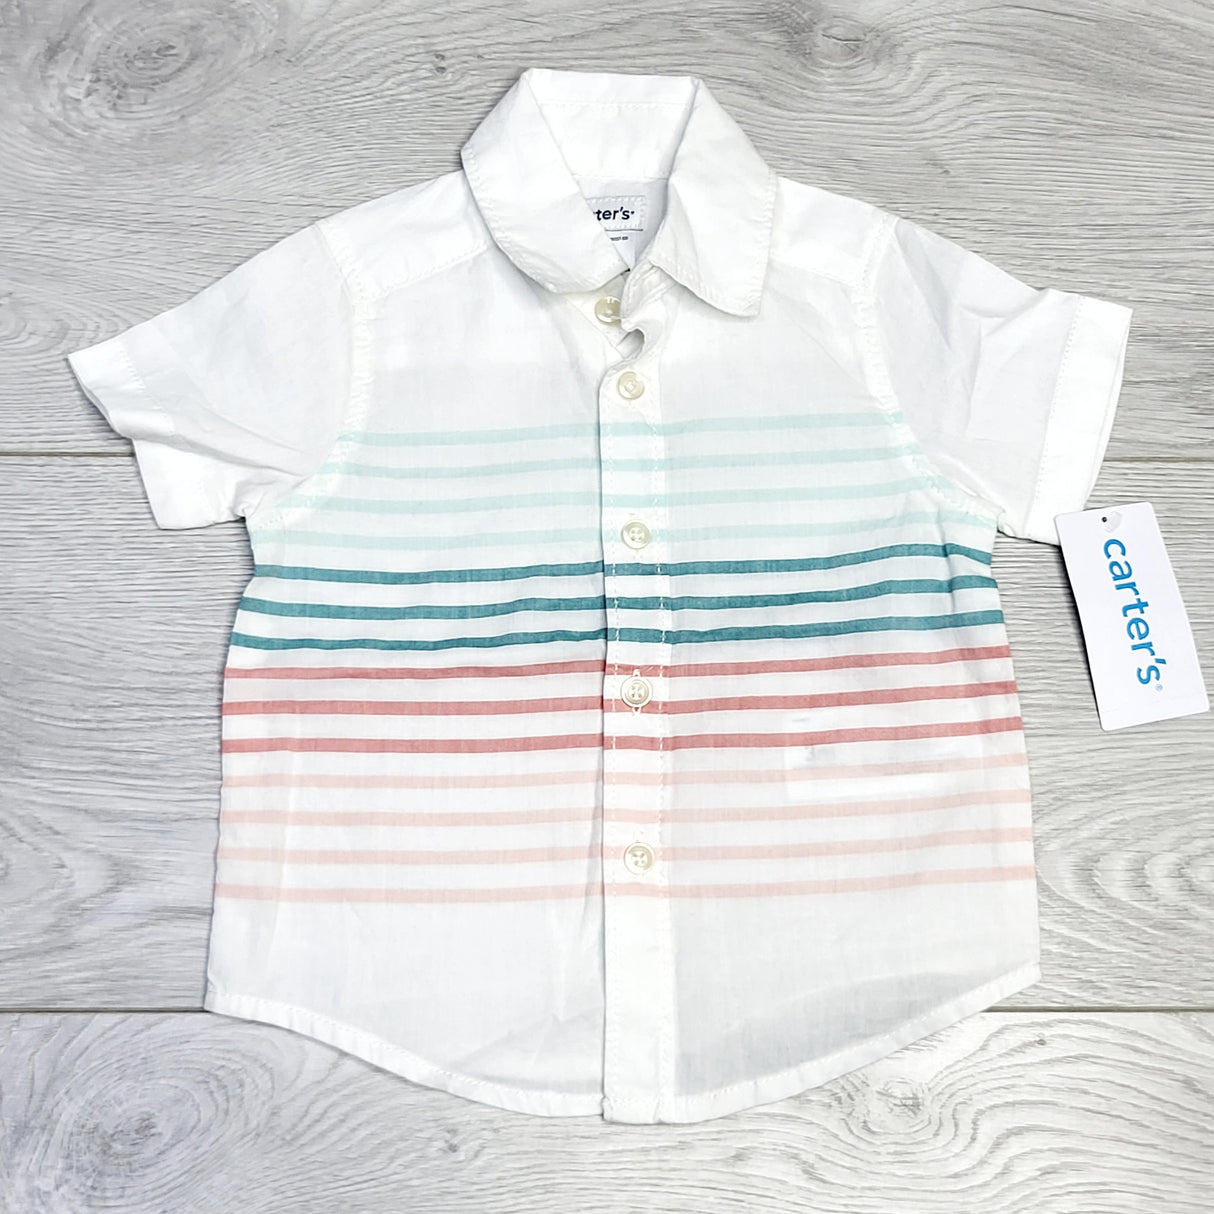 MSNDS11 - NEW - Carters white striped button down shirt. Size 3 months